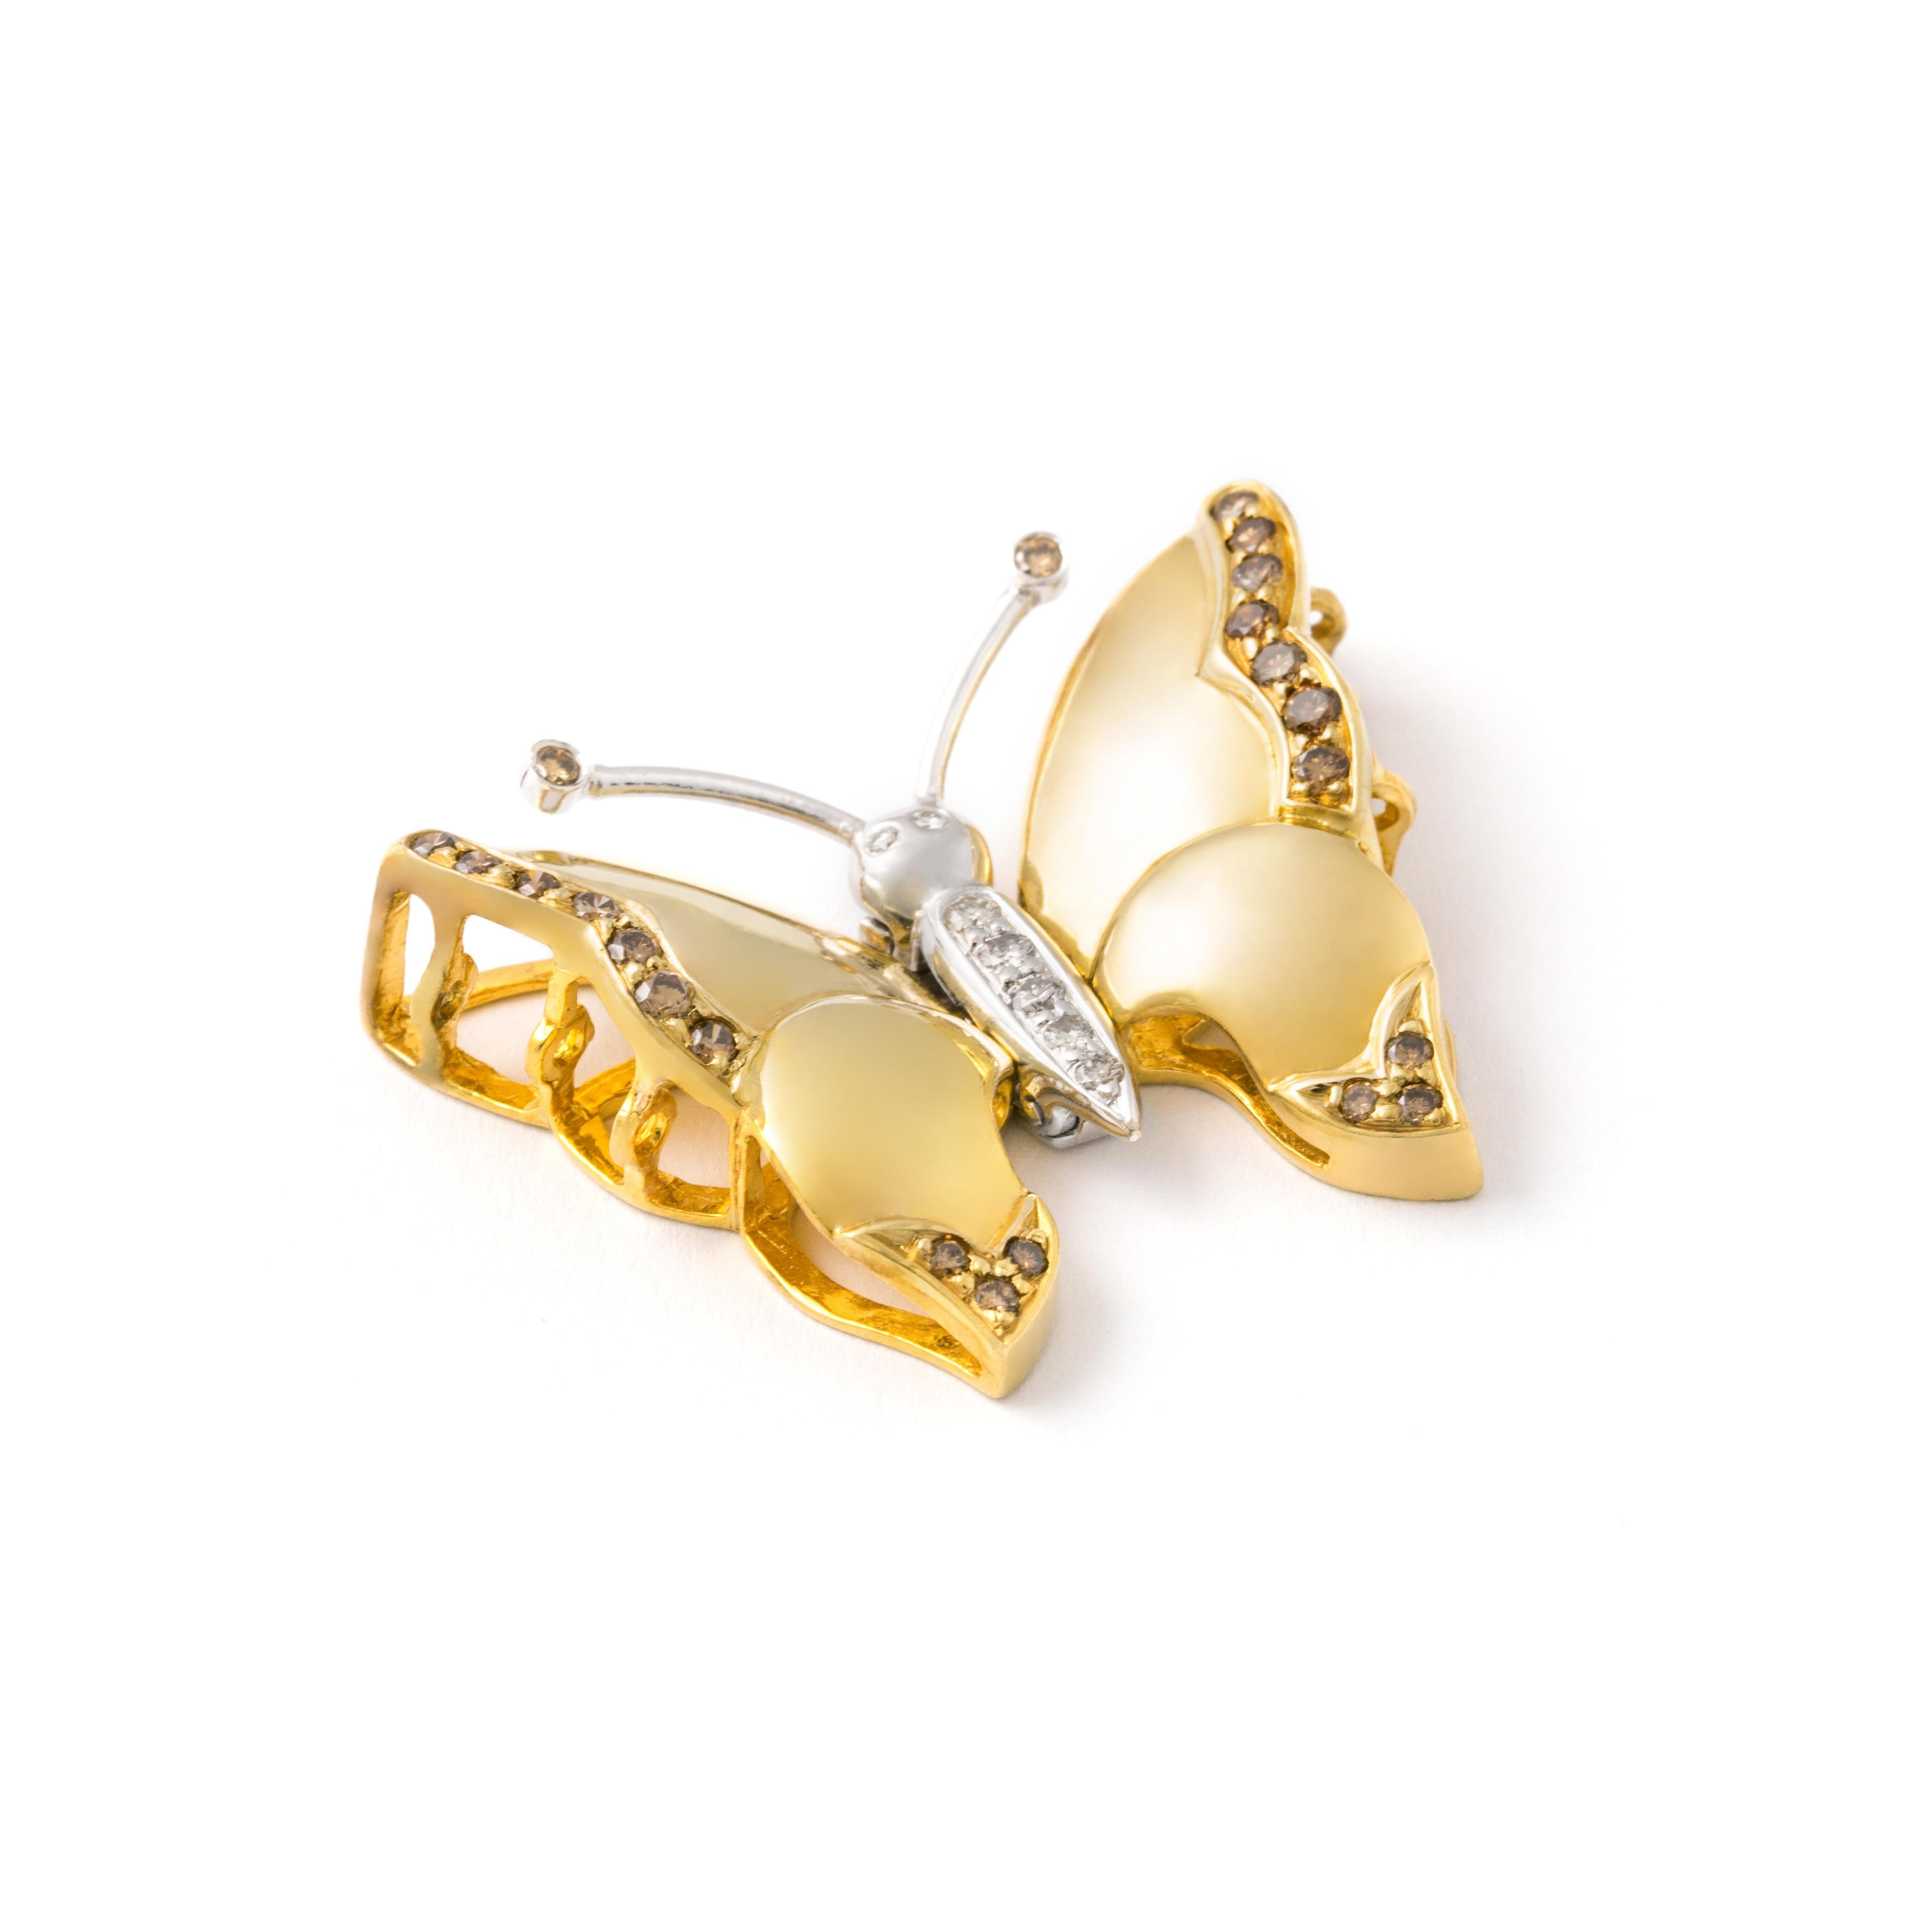 Diamond and yellow/white Gold Clasp designed as a stylized butterfly adaptable for necklace and bracelet.

Total length: approx. 3.00 centimeters.
Total width: approx. 3.20 centimeters.
Total weight: 14.39 grams.